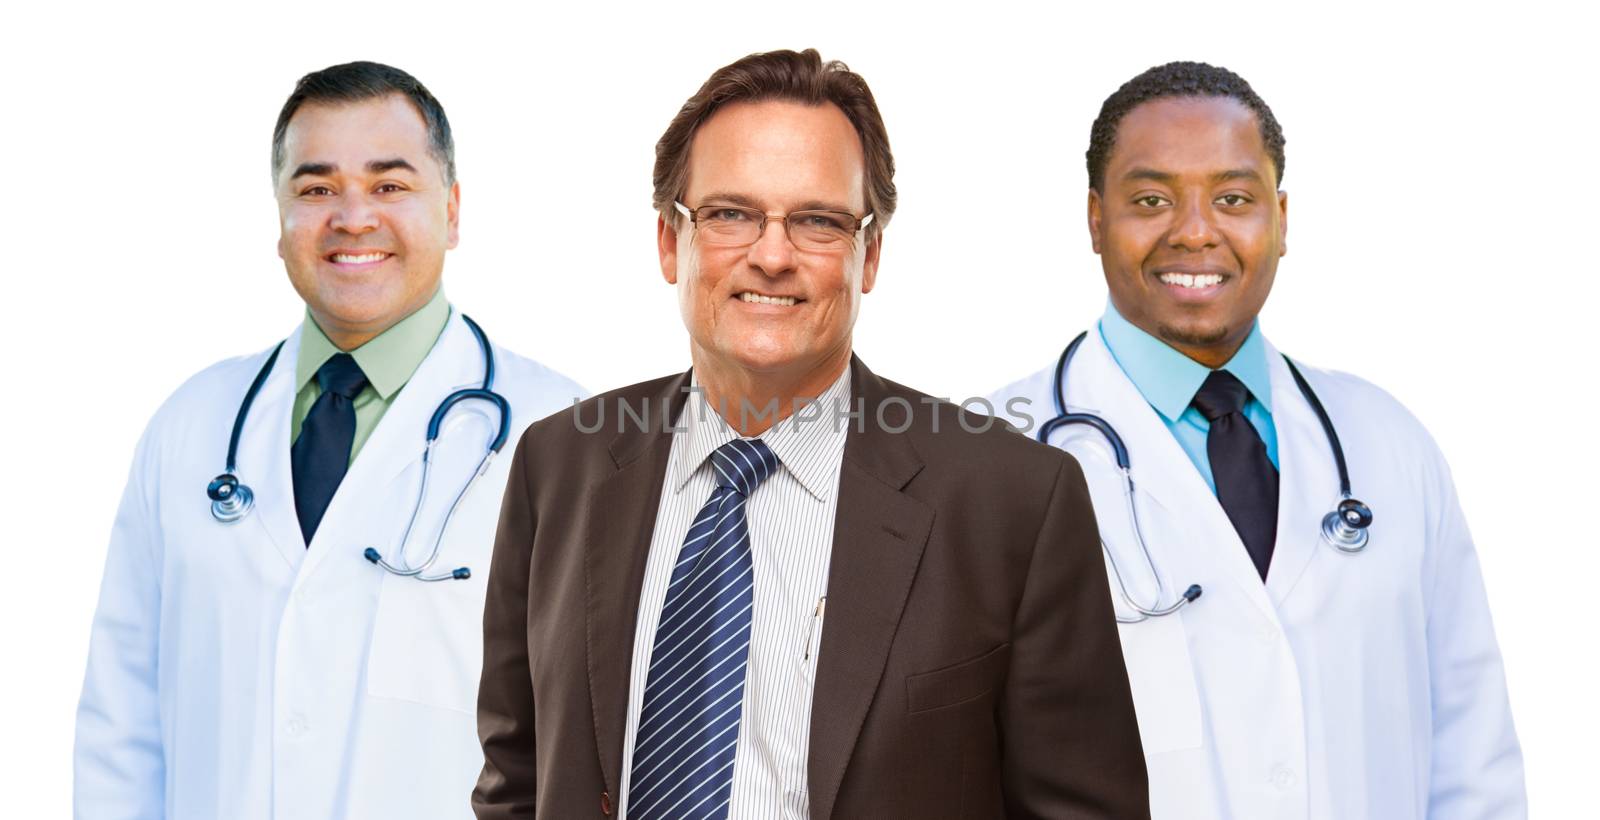 Two Mixed Race Doctors Behind Businessman  Isolated on a White Background.